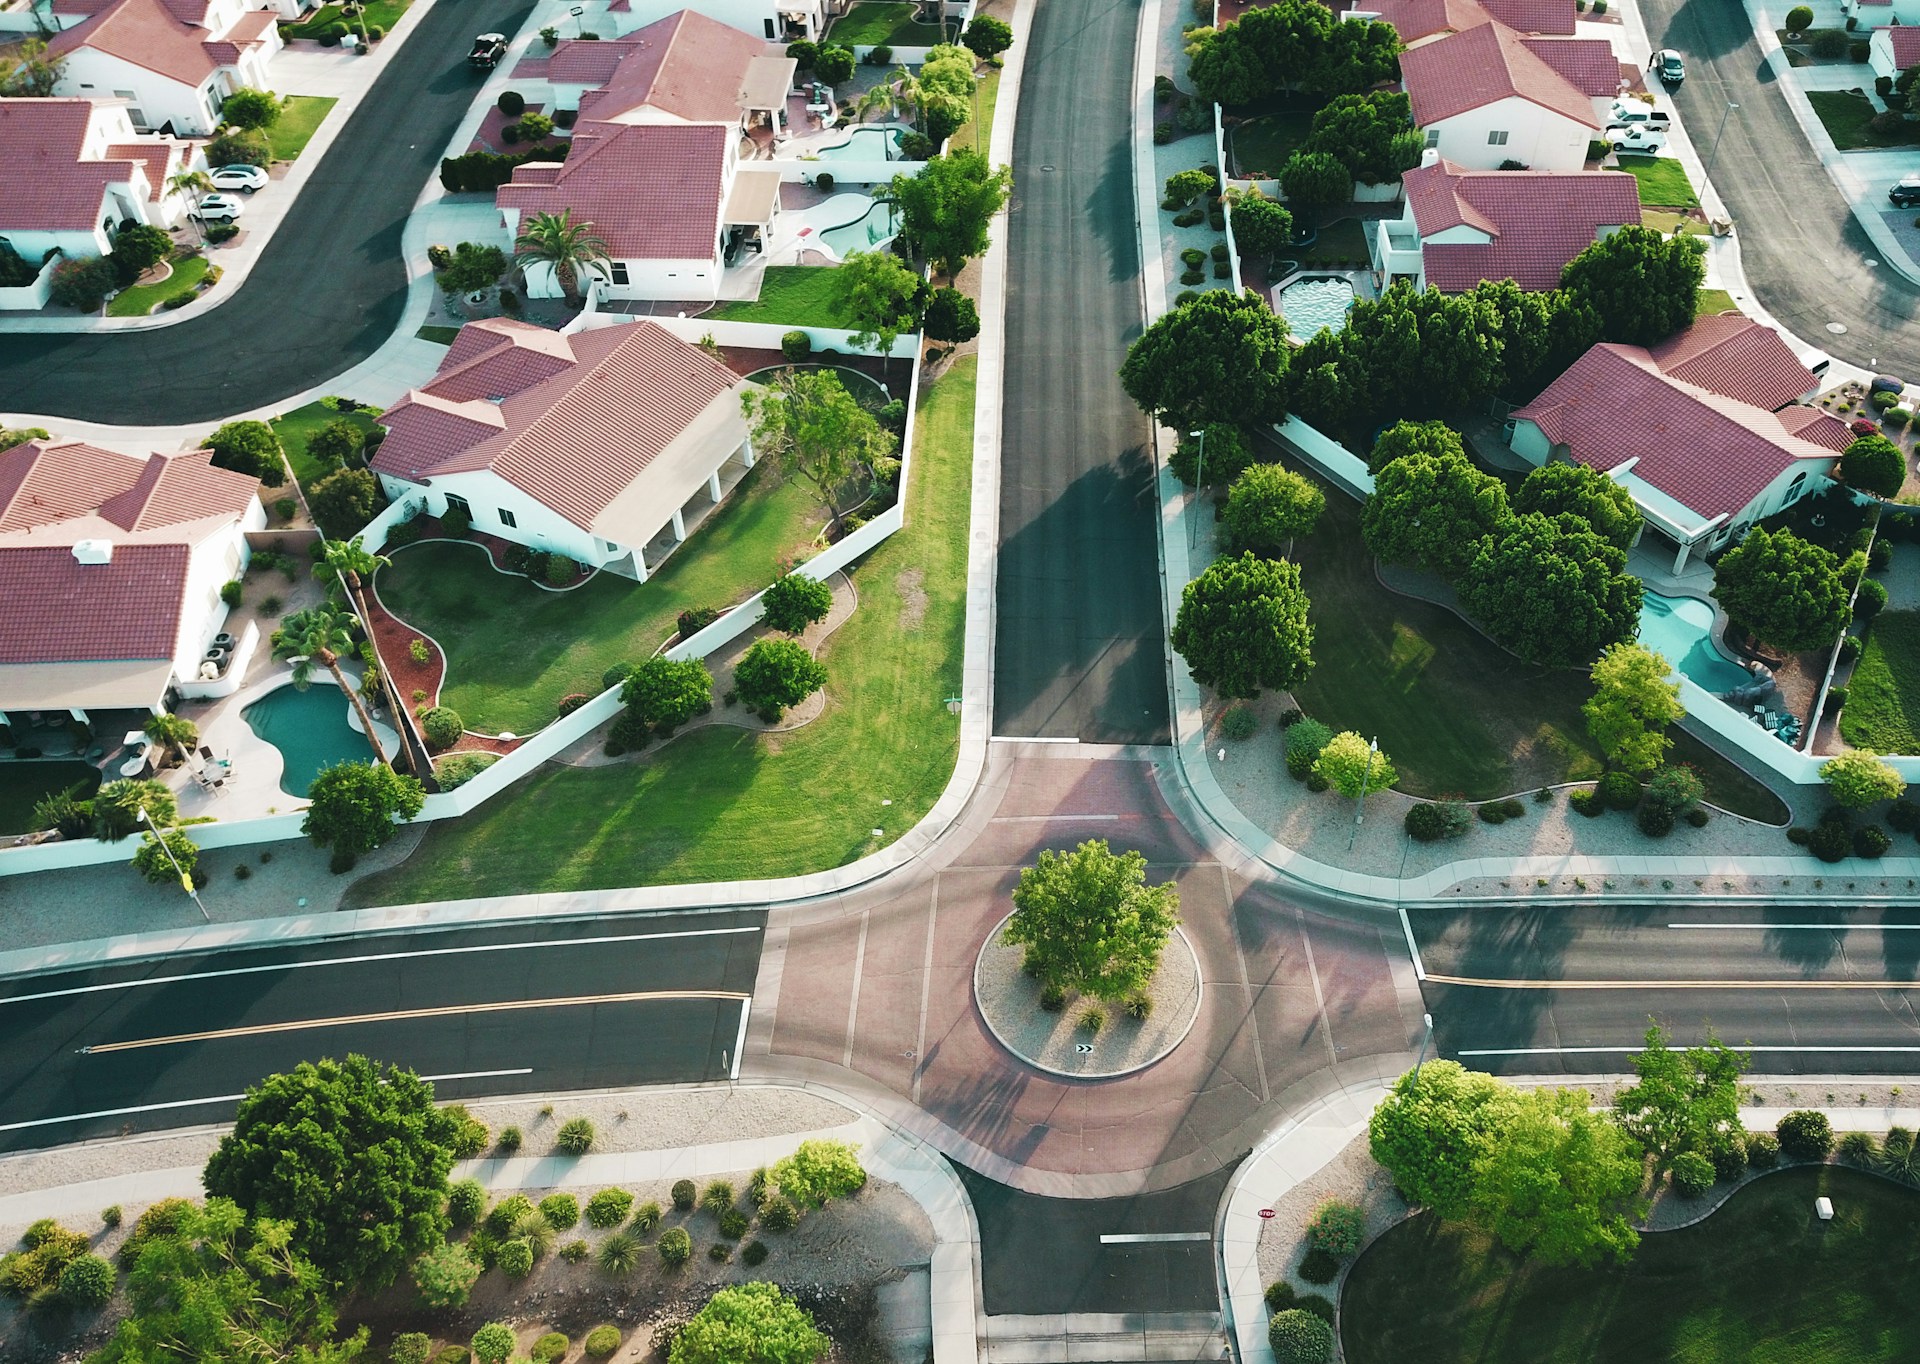 Arial view of housing. Image by Unsplash